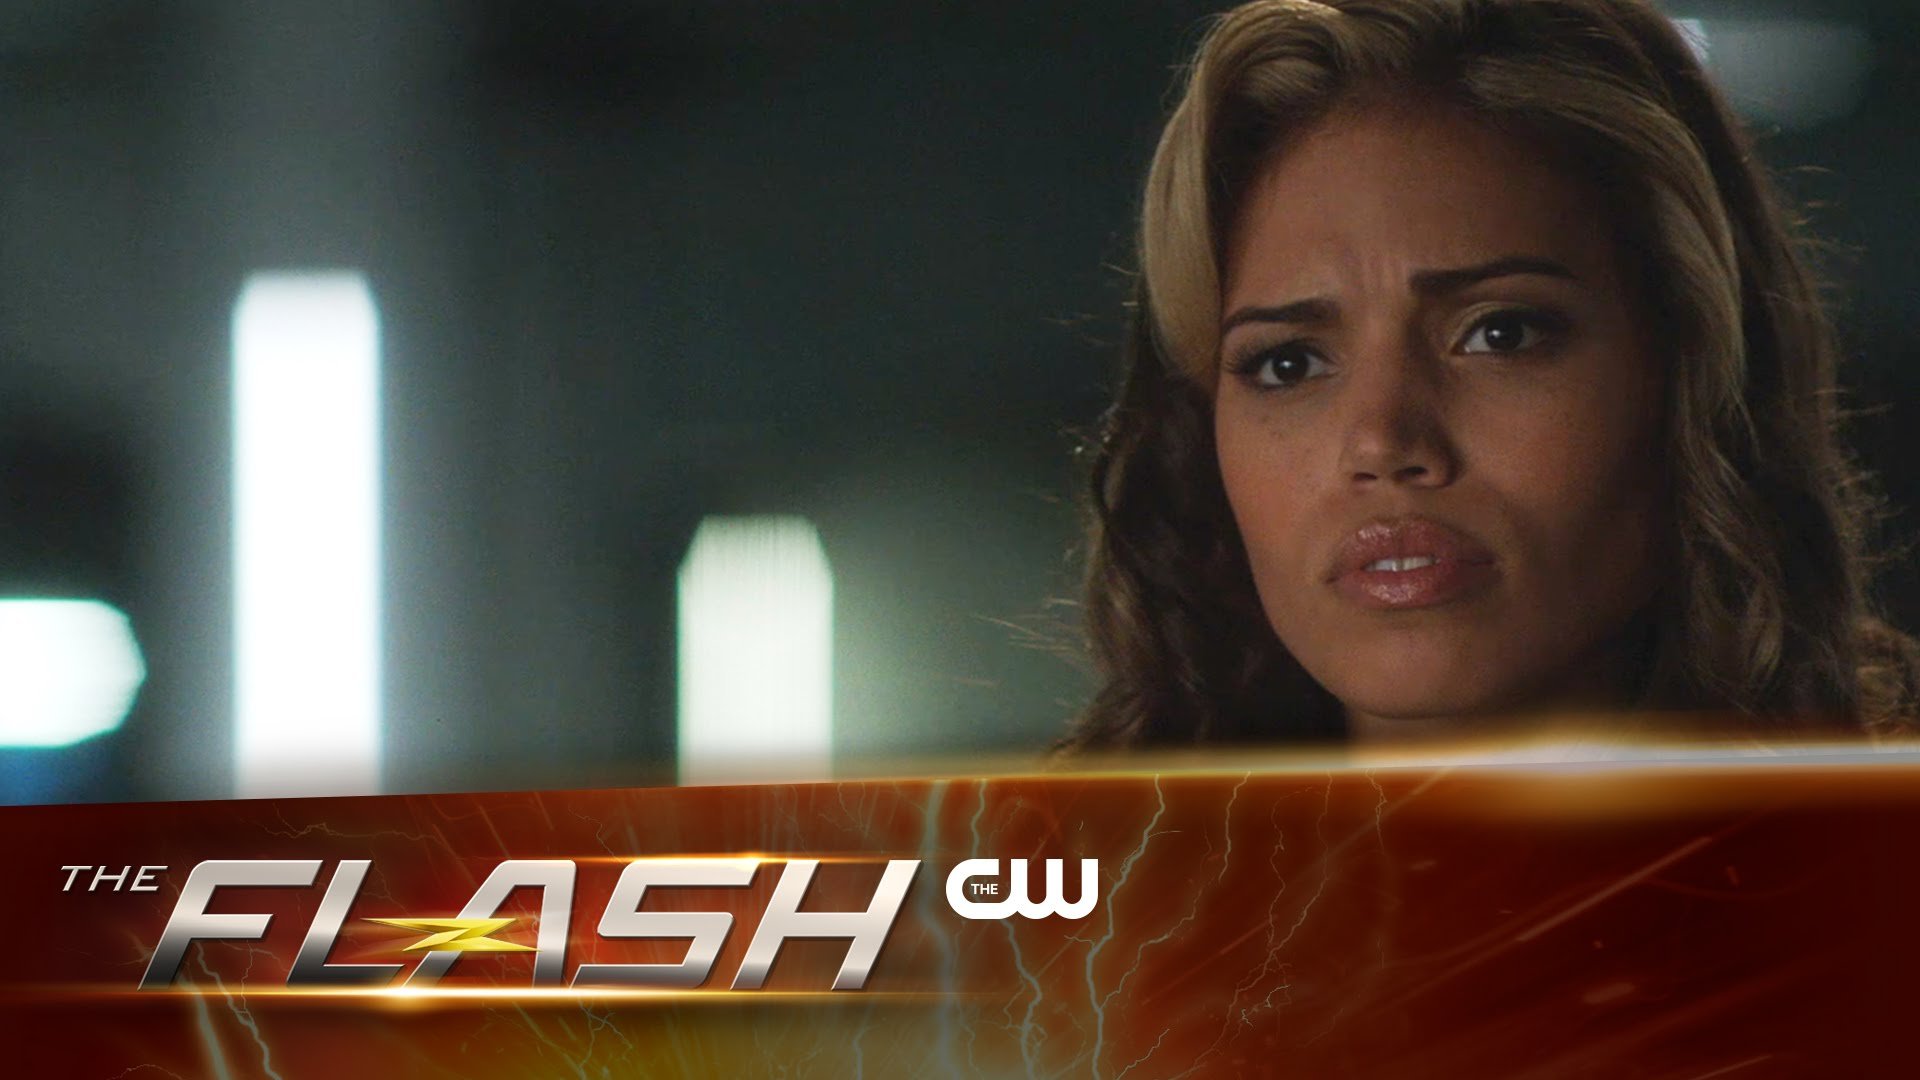 The Flash and Arrow Two-Part Crossover Event, “Legends of Today,” Debuts Tonight!